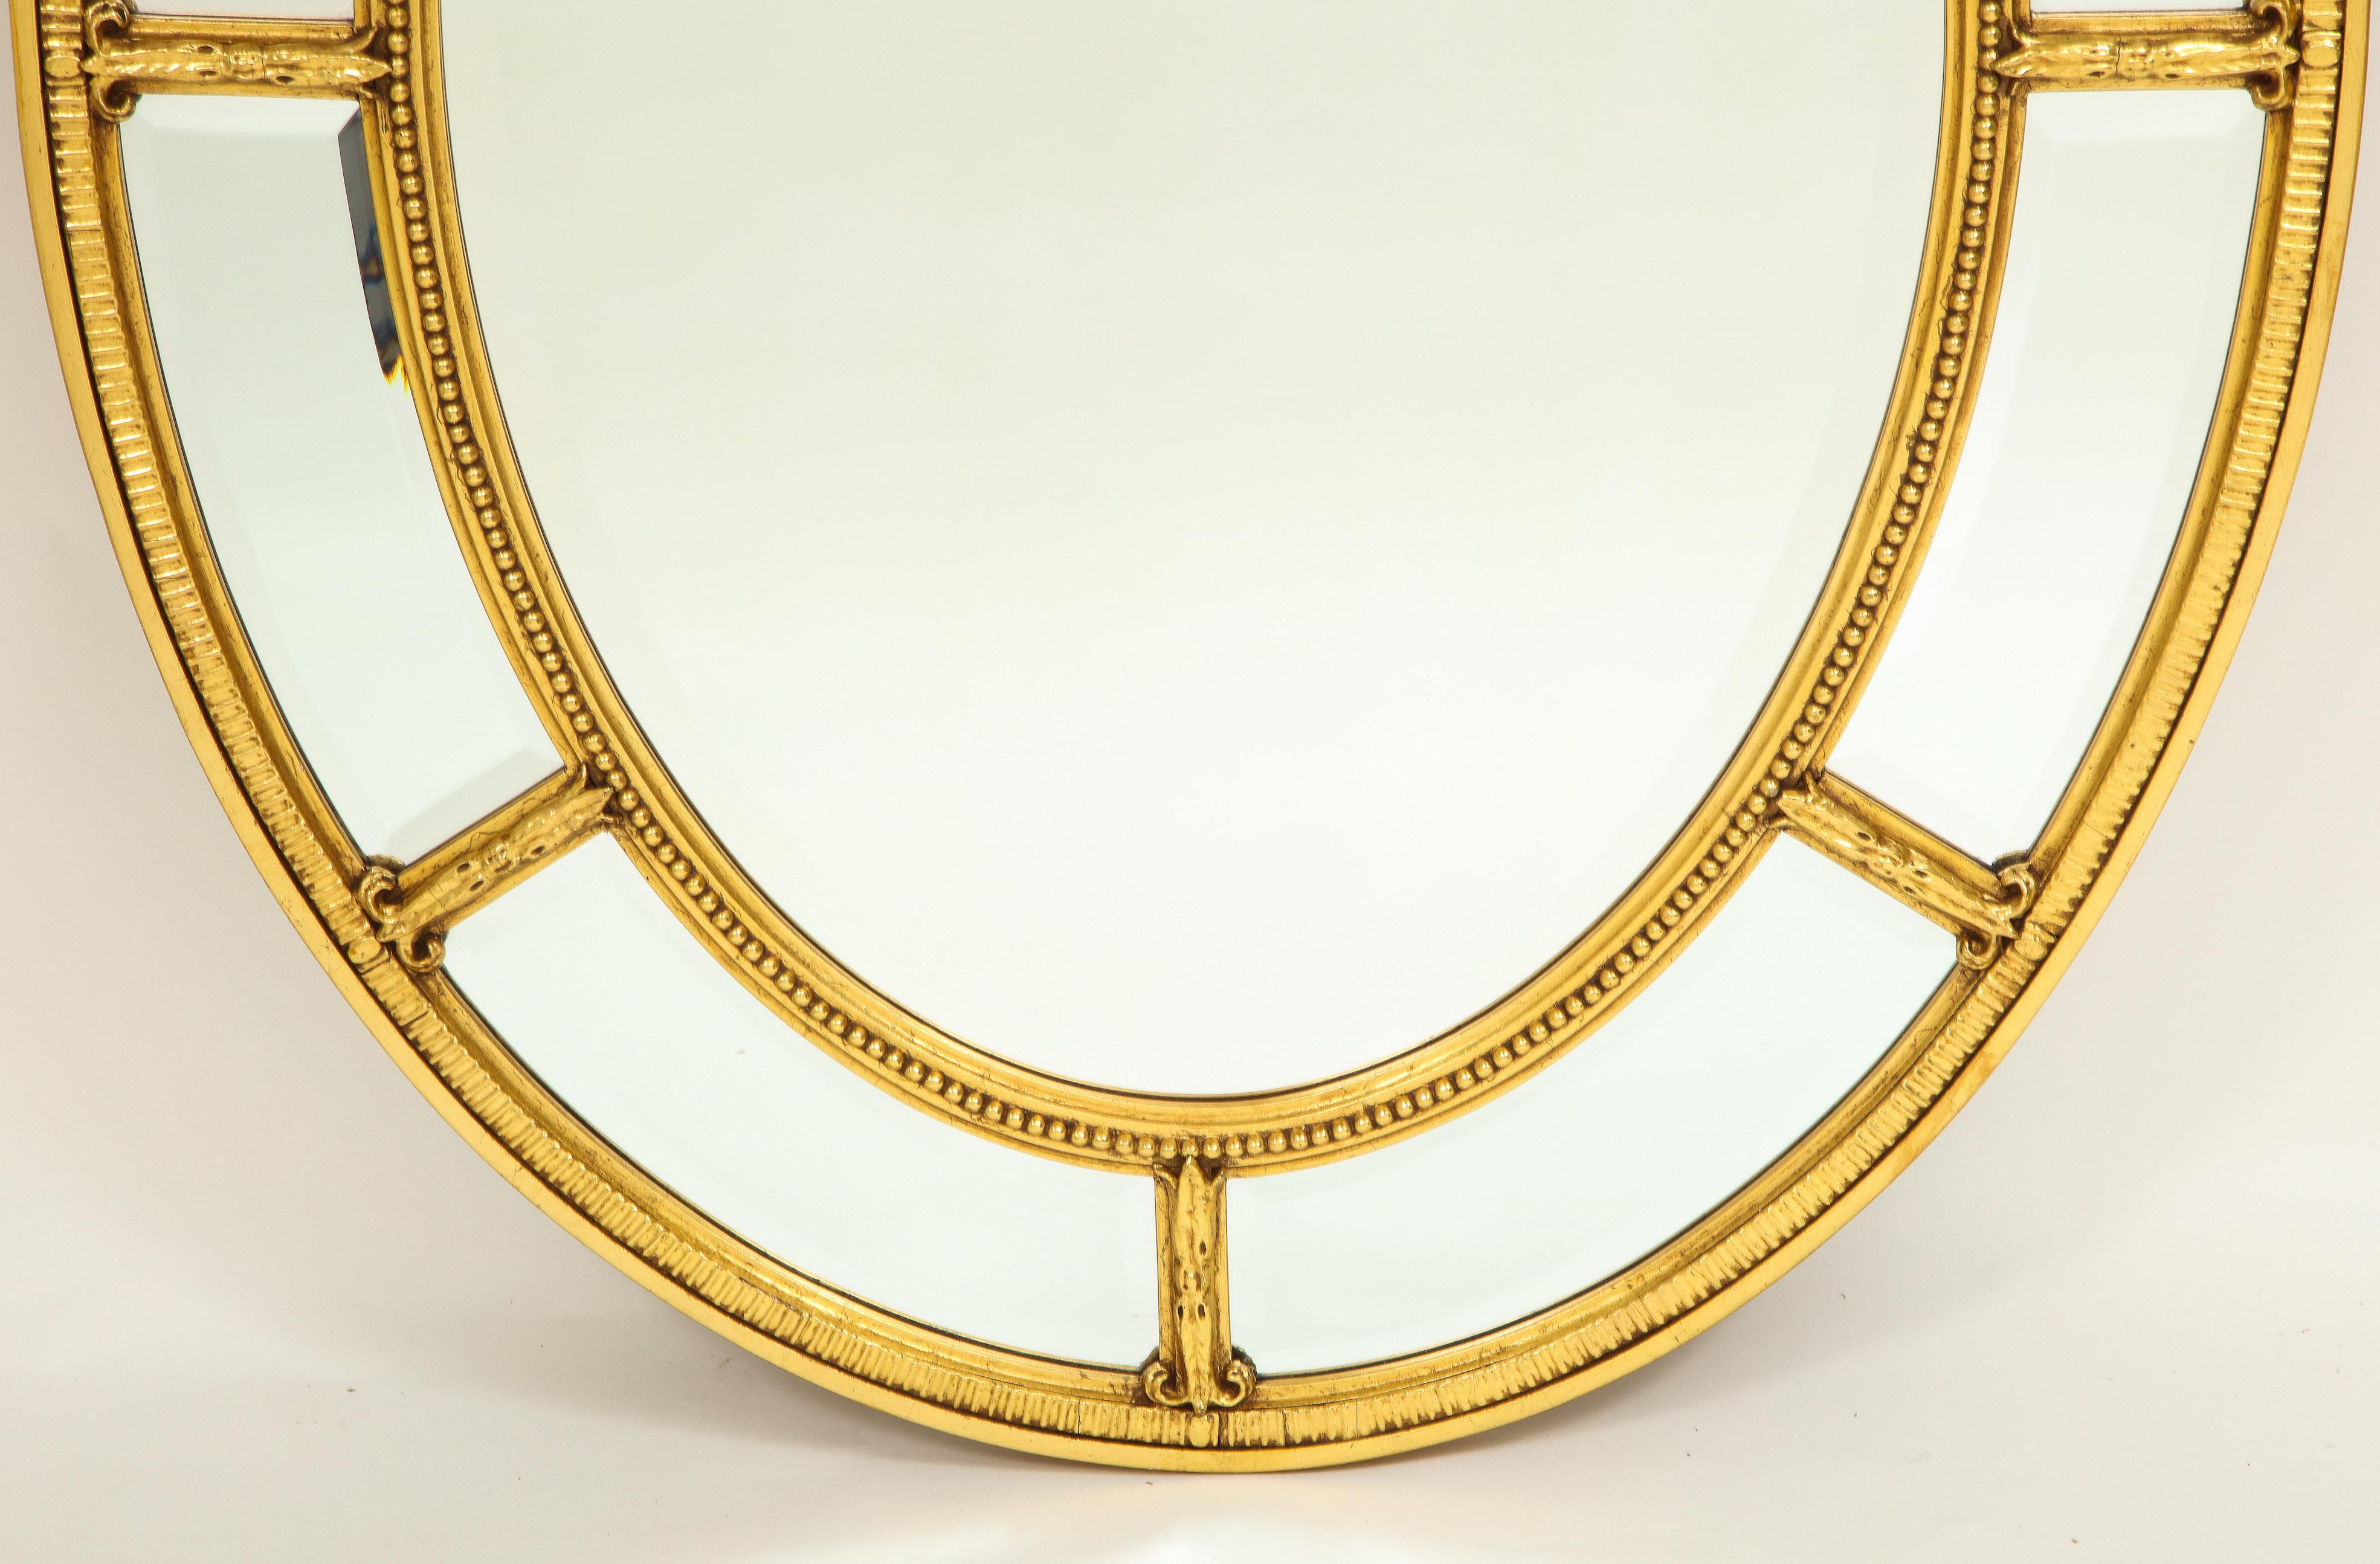 The oval mirror plate surrounded by border plats within a beaded frame.